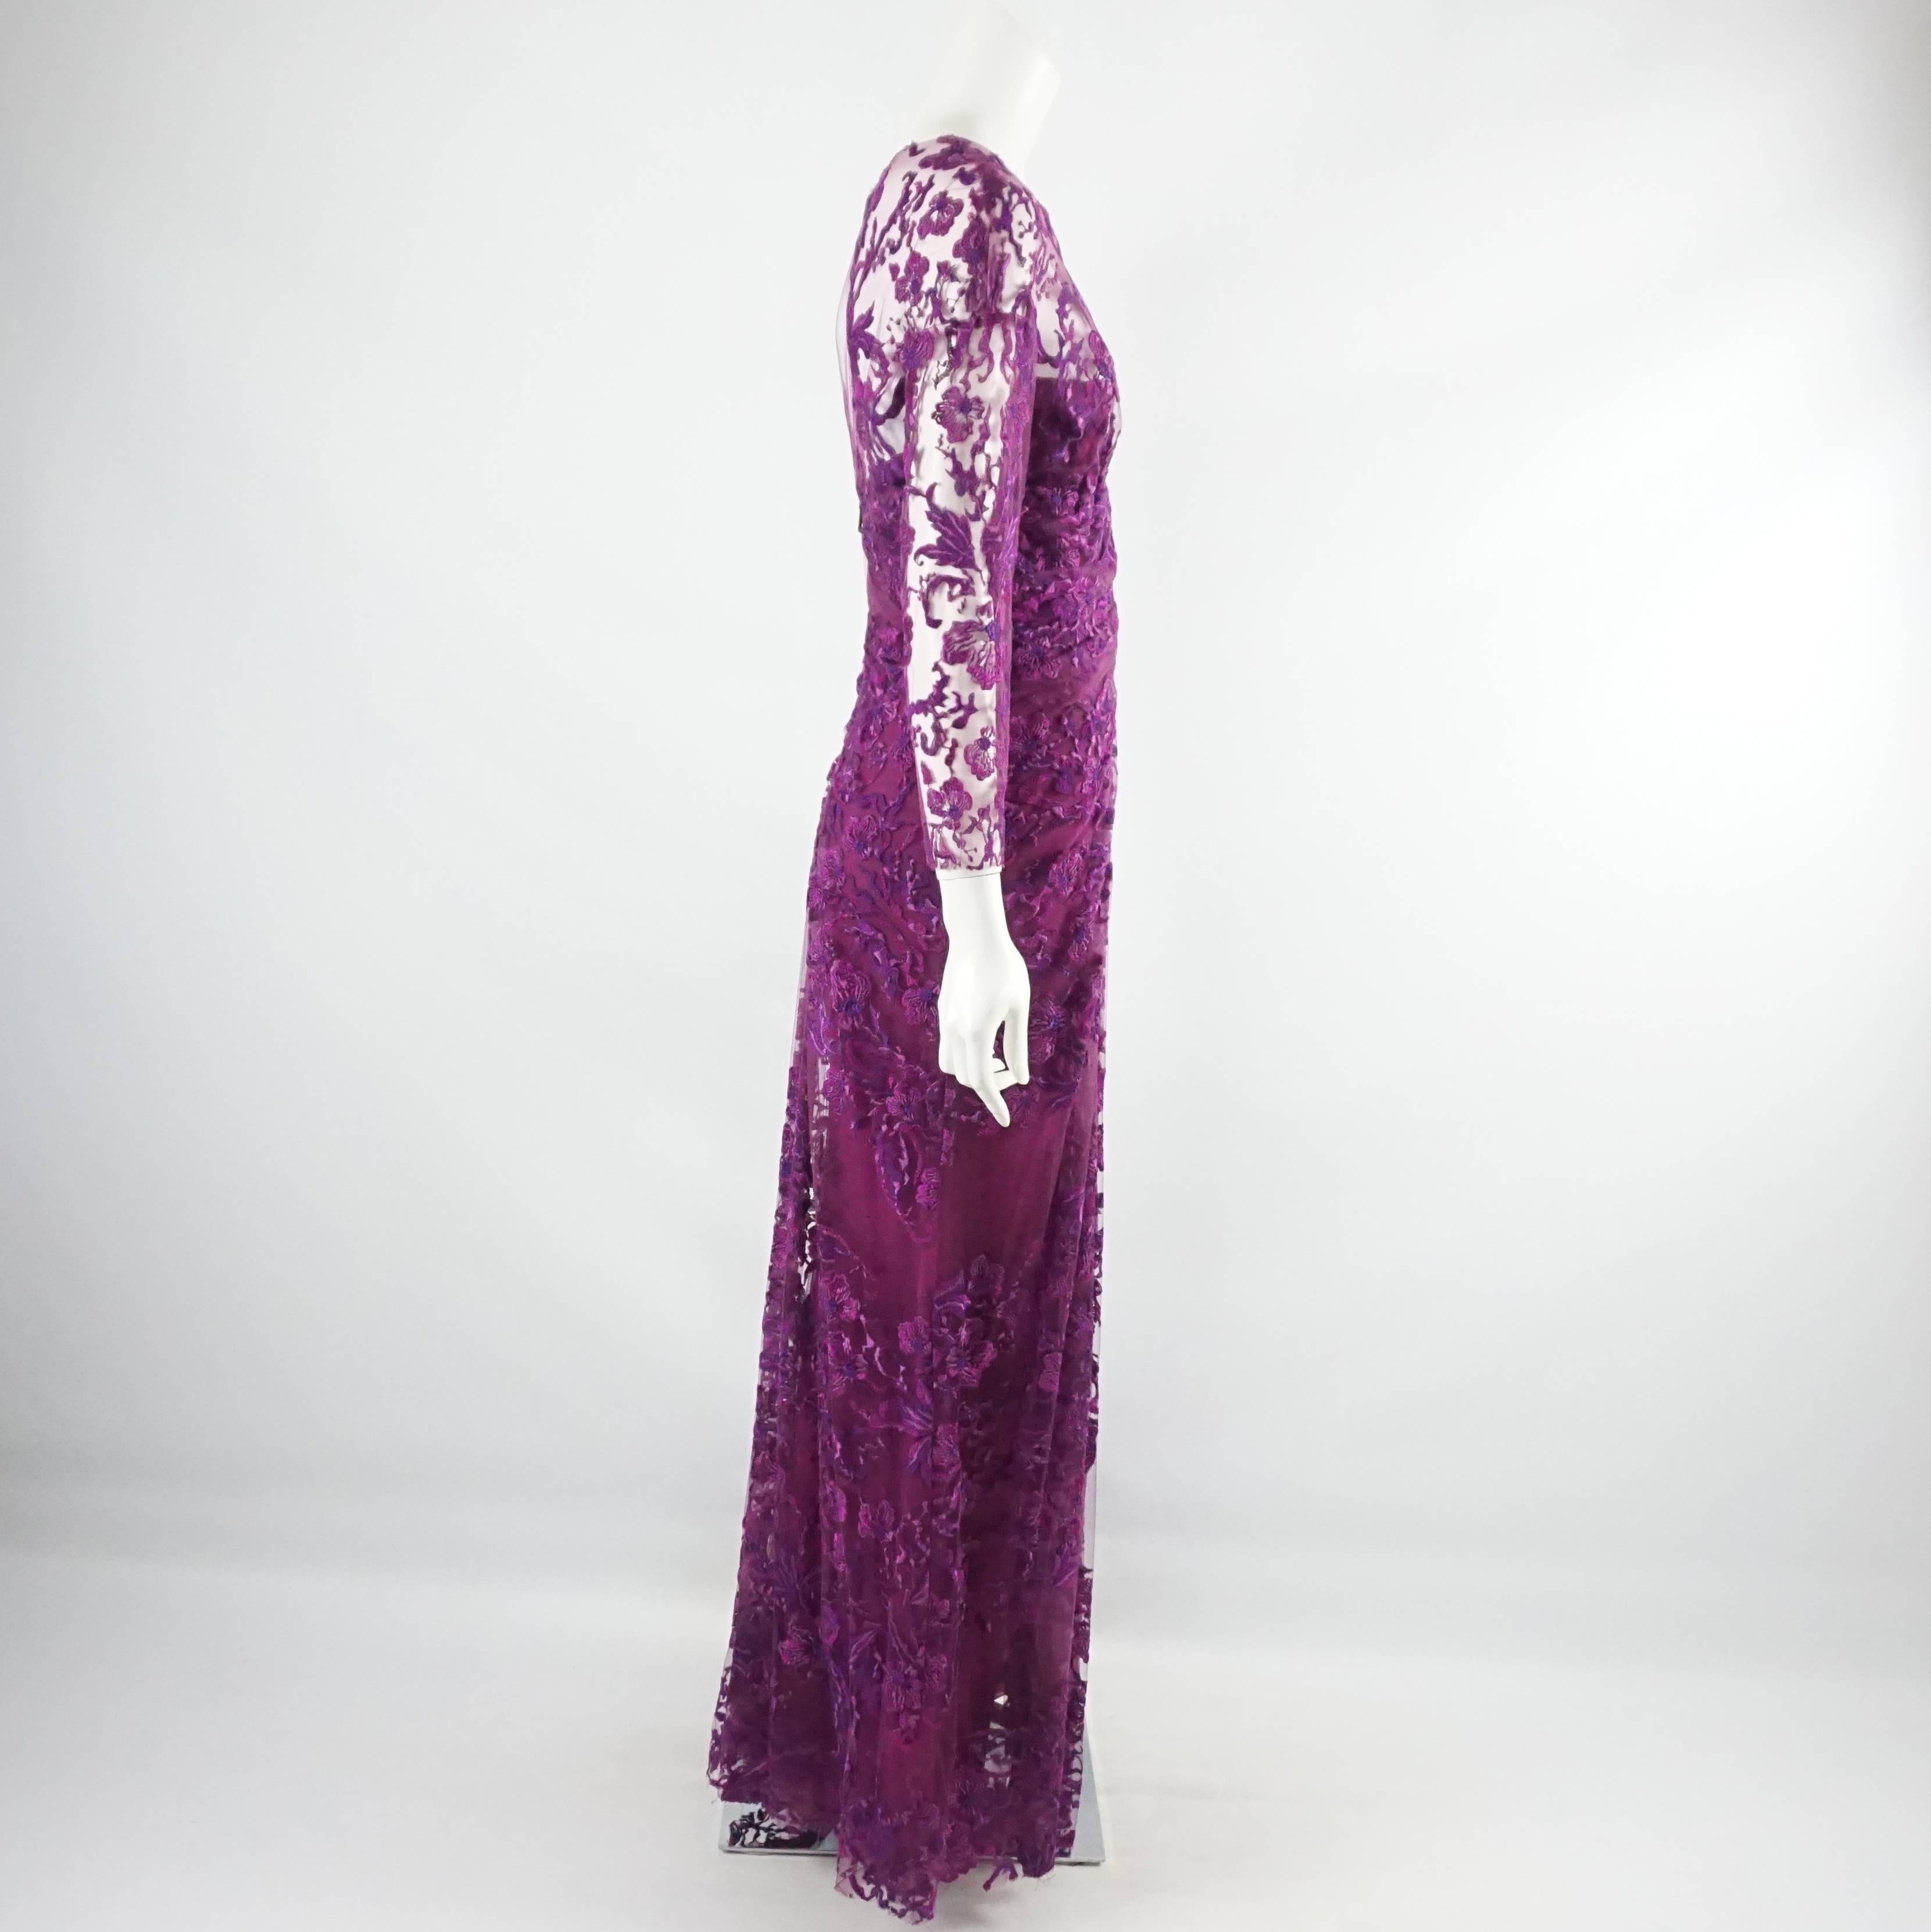 Monique Lhuillier Purple Lace Long Sleeve Gown - 10. This Monique Lhuillier gown is long sleeved and covered in lace. It is various shades of purple and is fitted through the bodice and then flows out. This gown is in excellent condition. Size